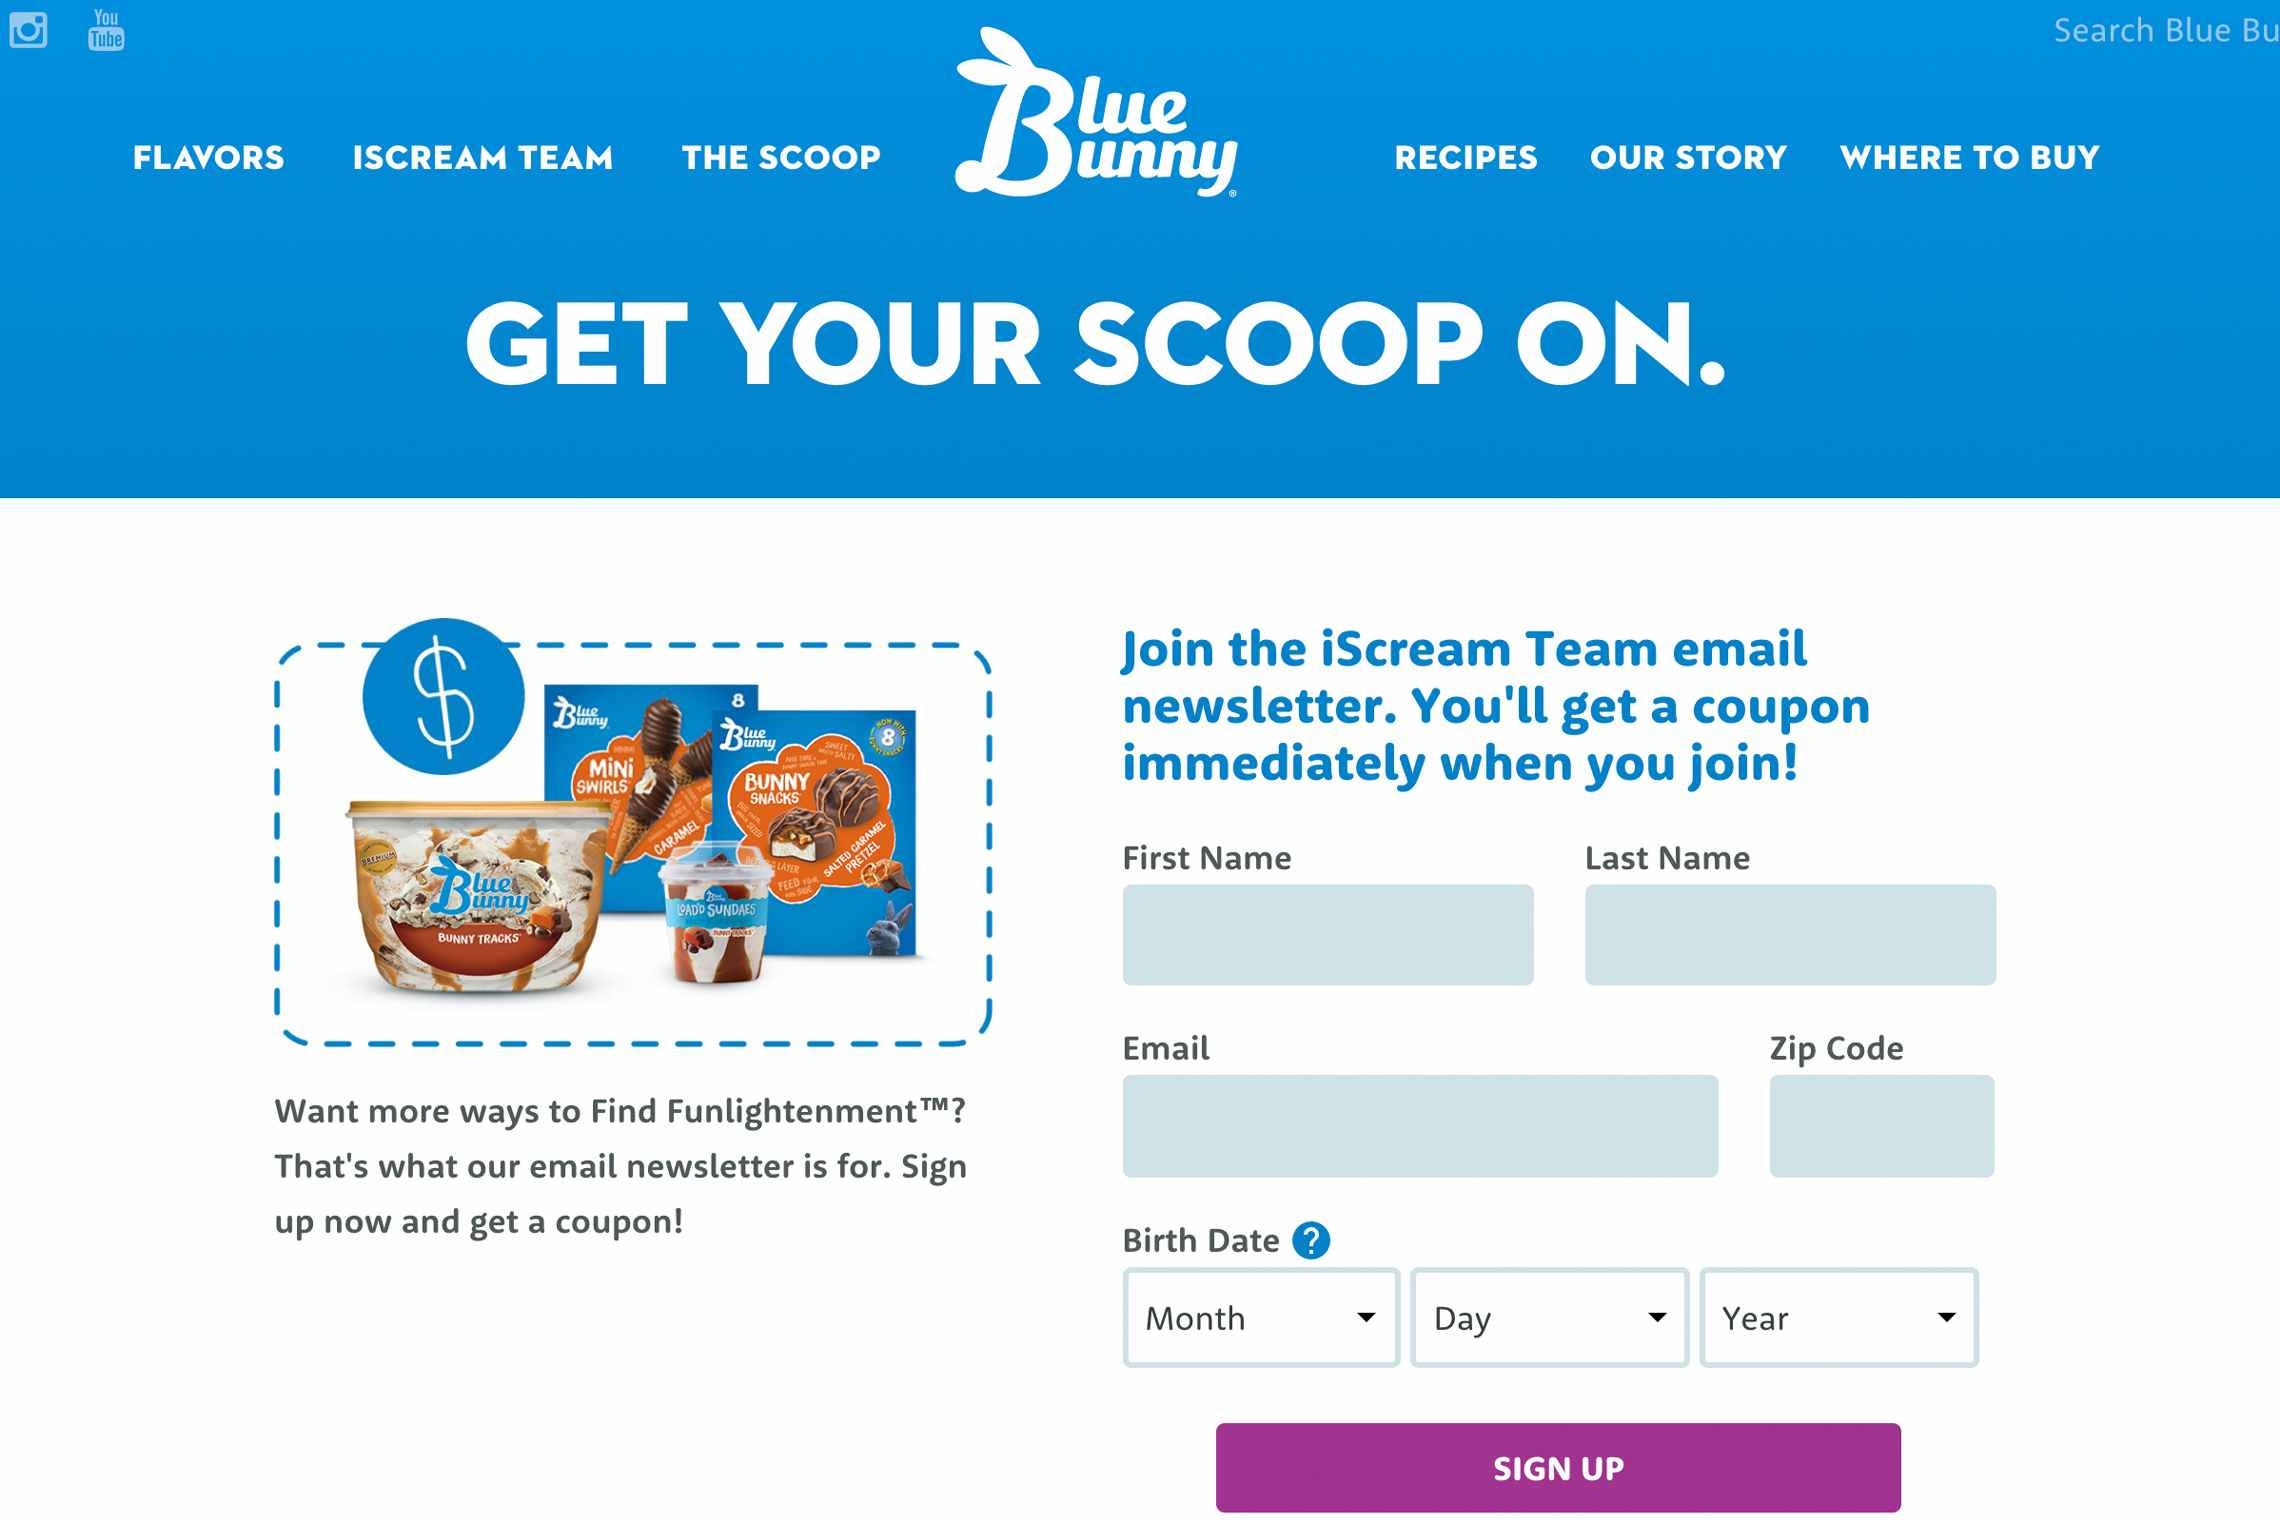 Blue Bunny ice cream website sign up form for email coupons.